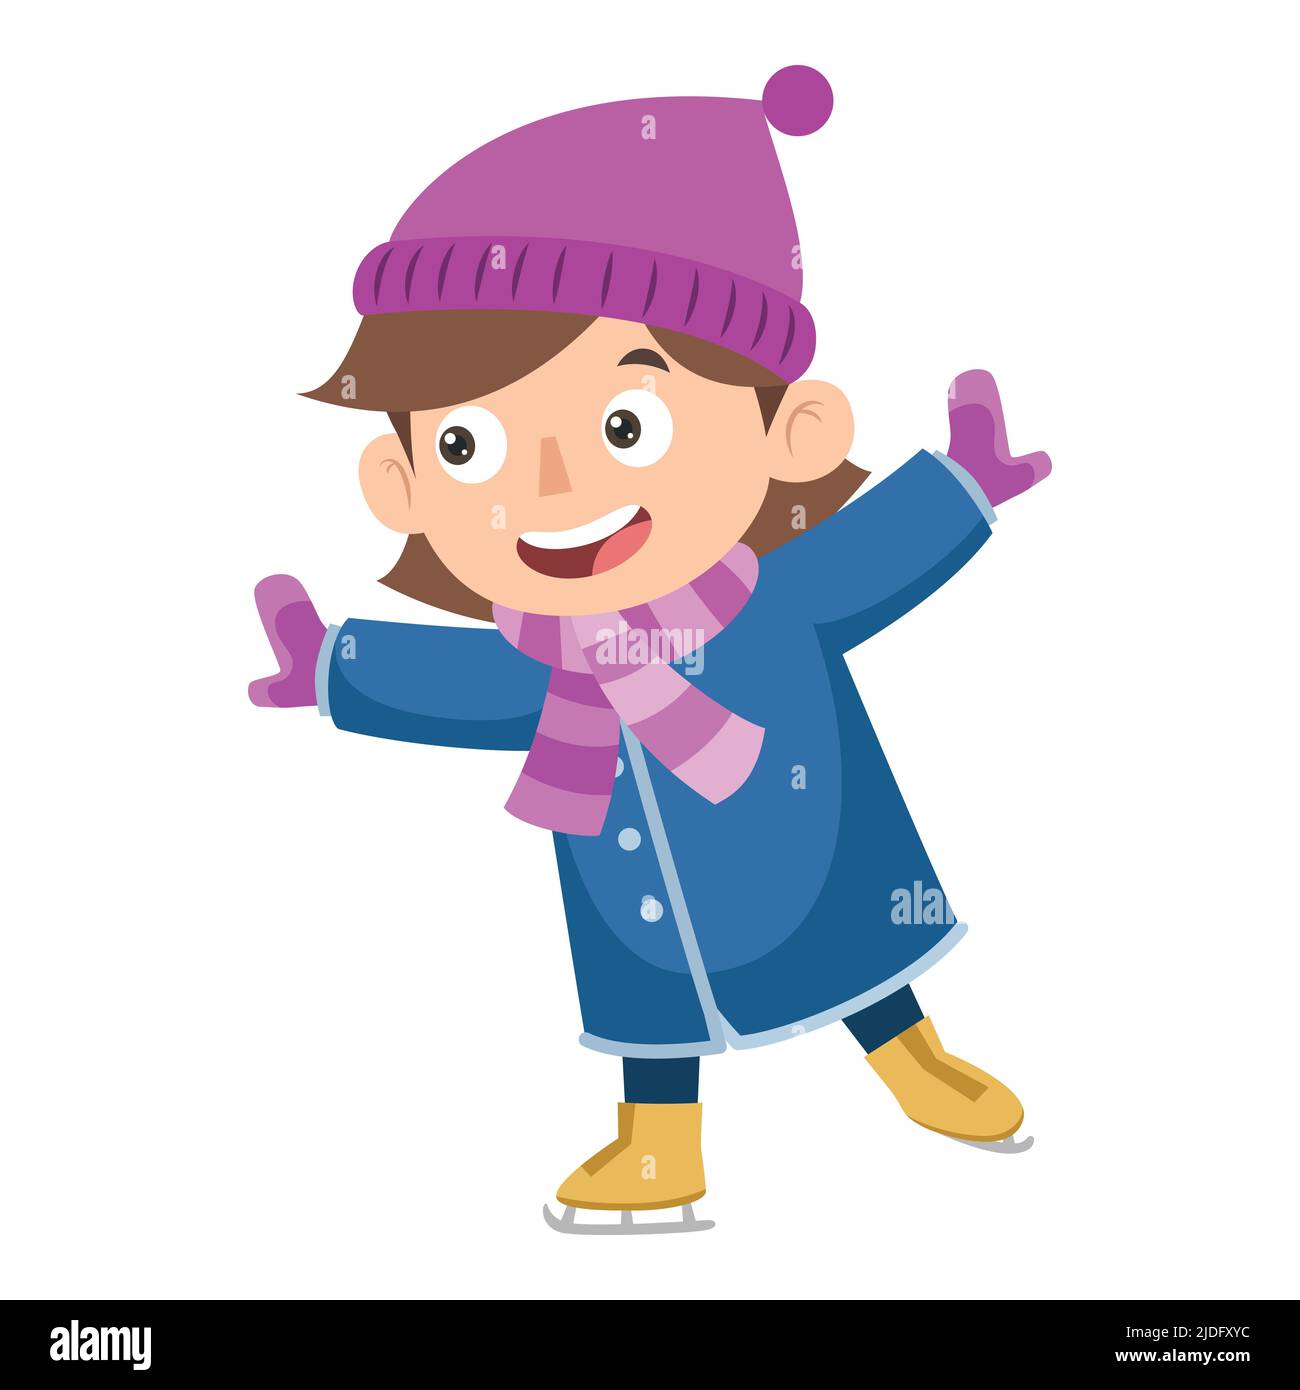 Skateboarding and Skating Clipart-girl wearing winter clothes ice